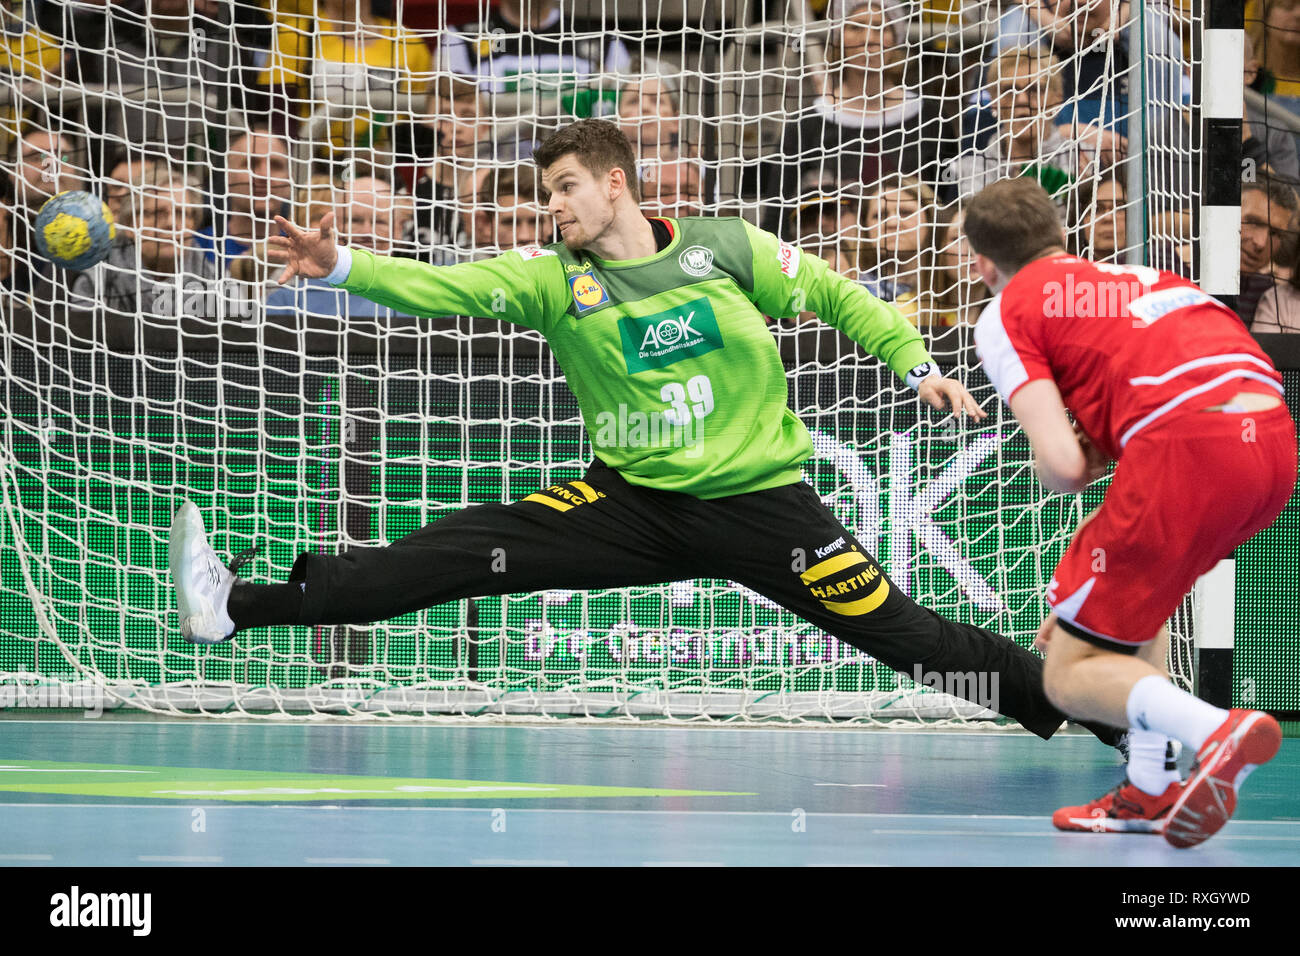 Dusseldorf, Germany. 9th March 2019. Handball: International match, Germany - Switzerland in the ISS Dome. Germany's Christopher Rudeck (l) and Switzerland's Marvin Lier fight for the ball. Photo: Federico Gambarini/dpa Credit: dpa picture alliance/Alamy Live News Stock Photo